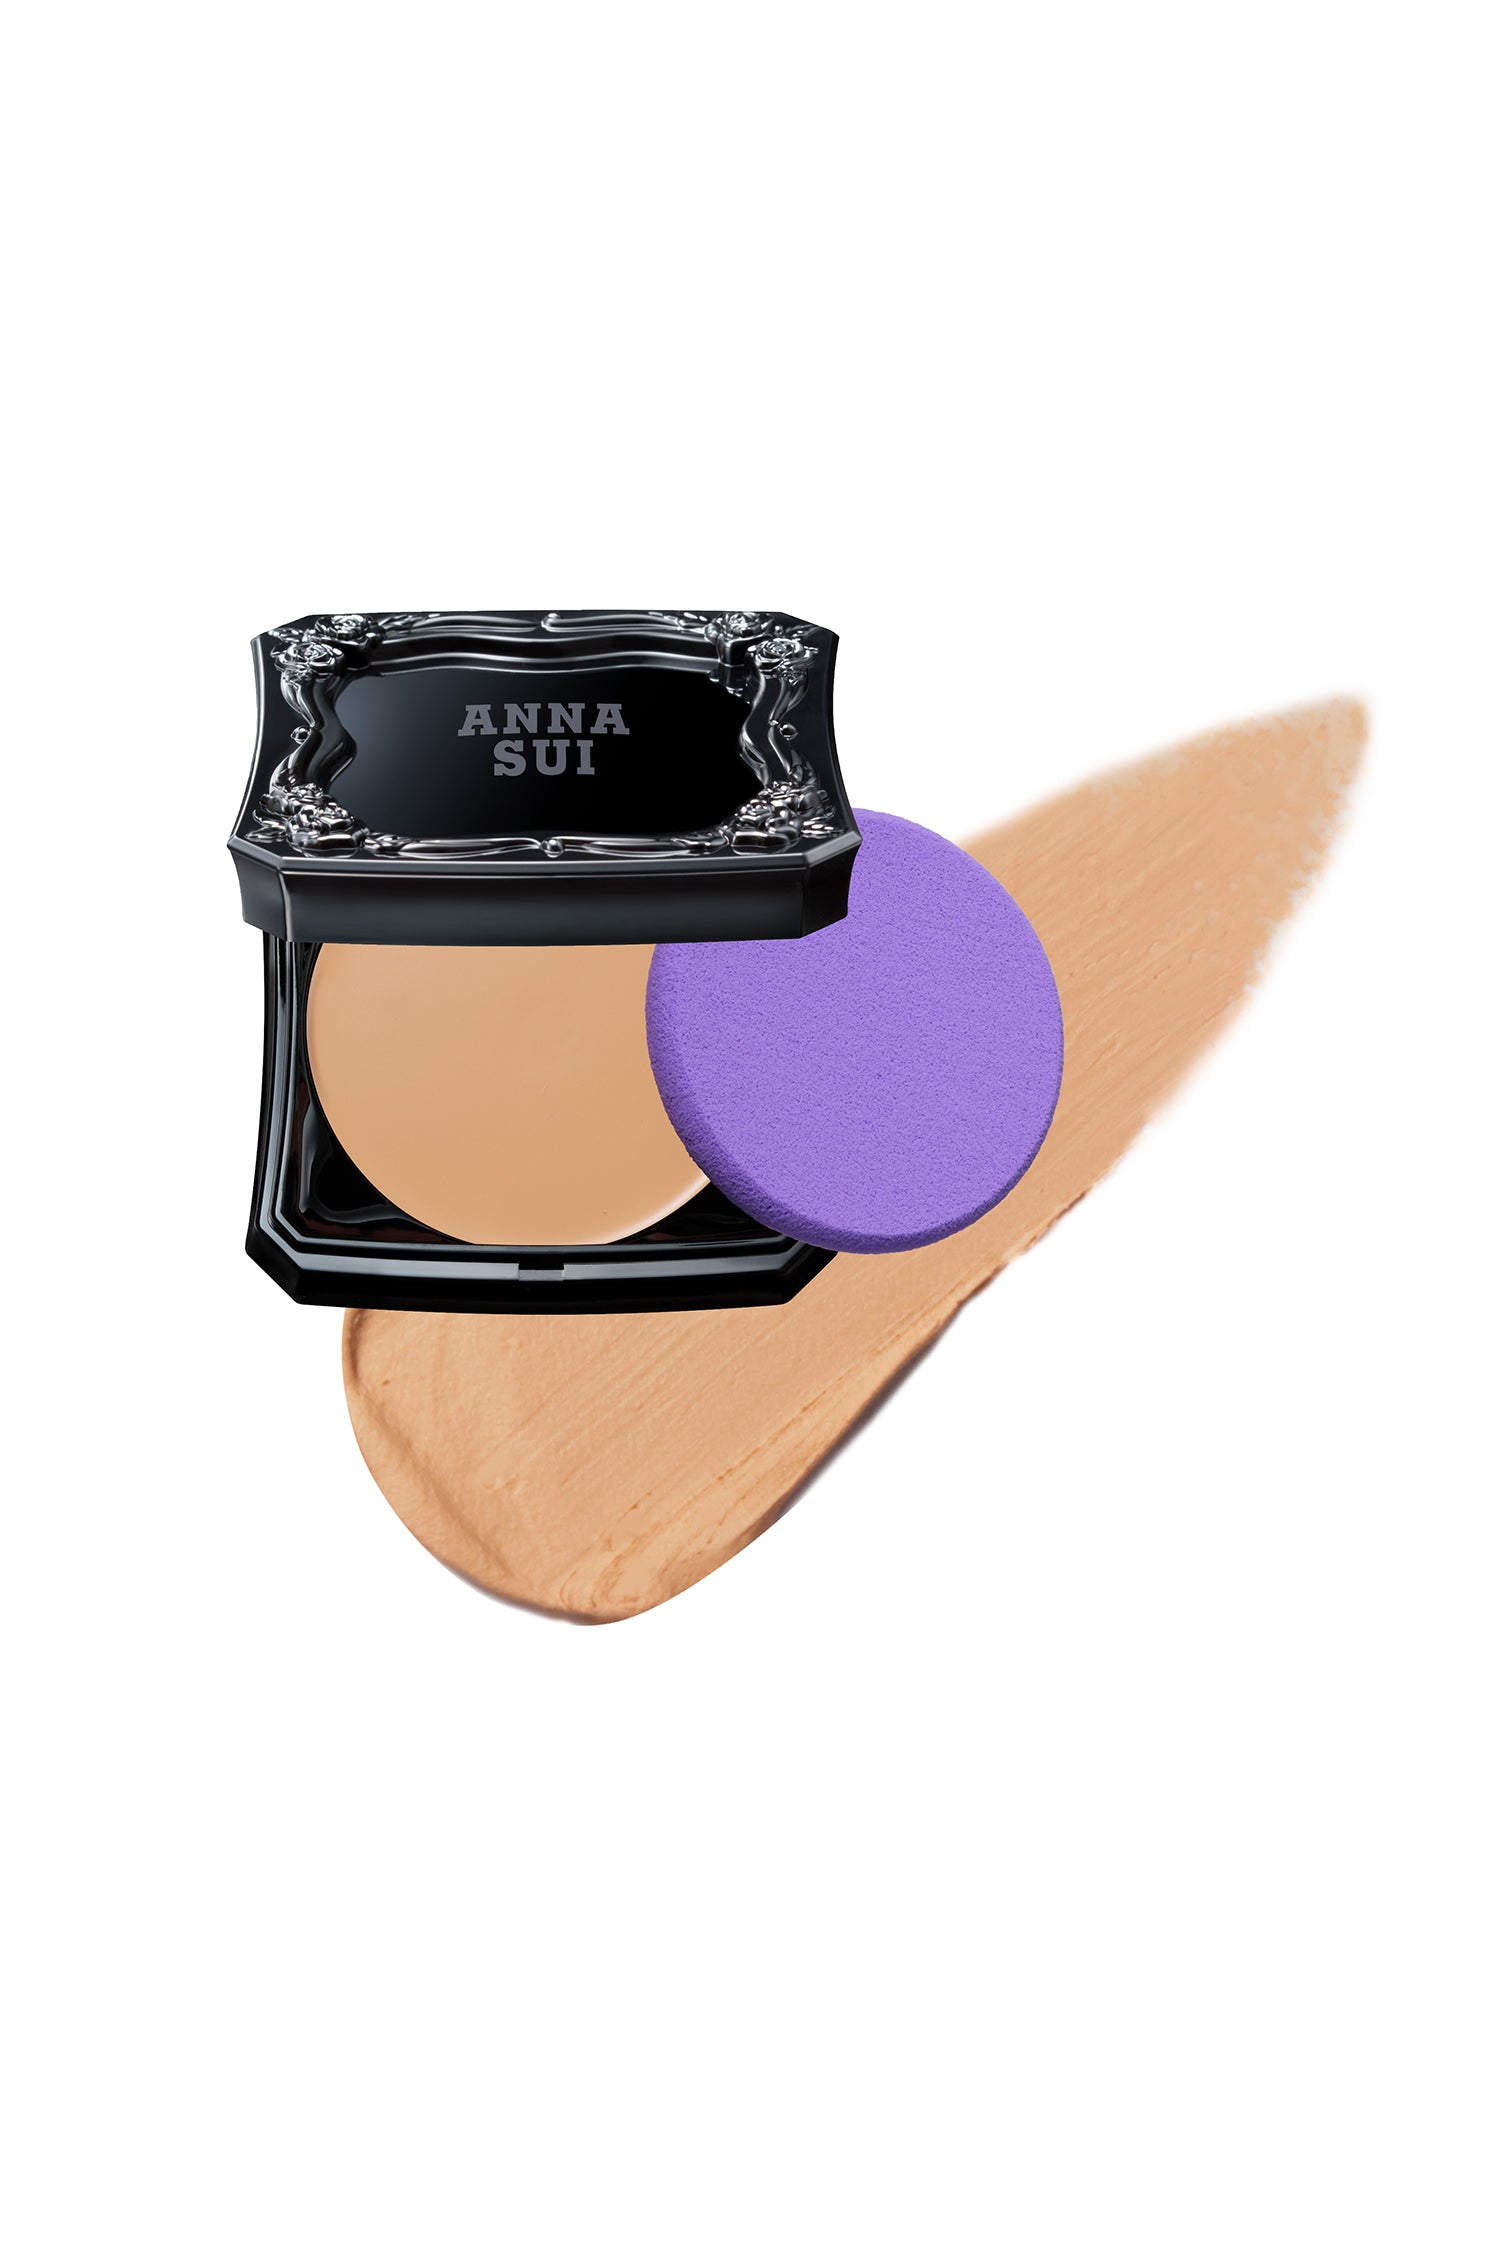 MEDIUM  foundation is in a black container with raised rose pattern, label with powders and violet pad